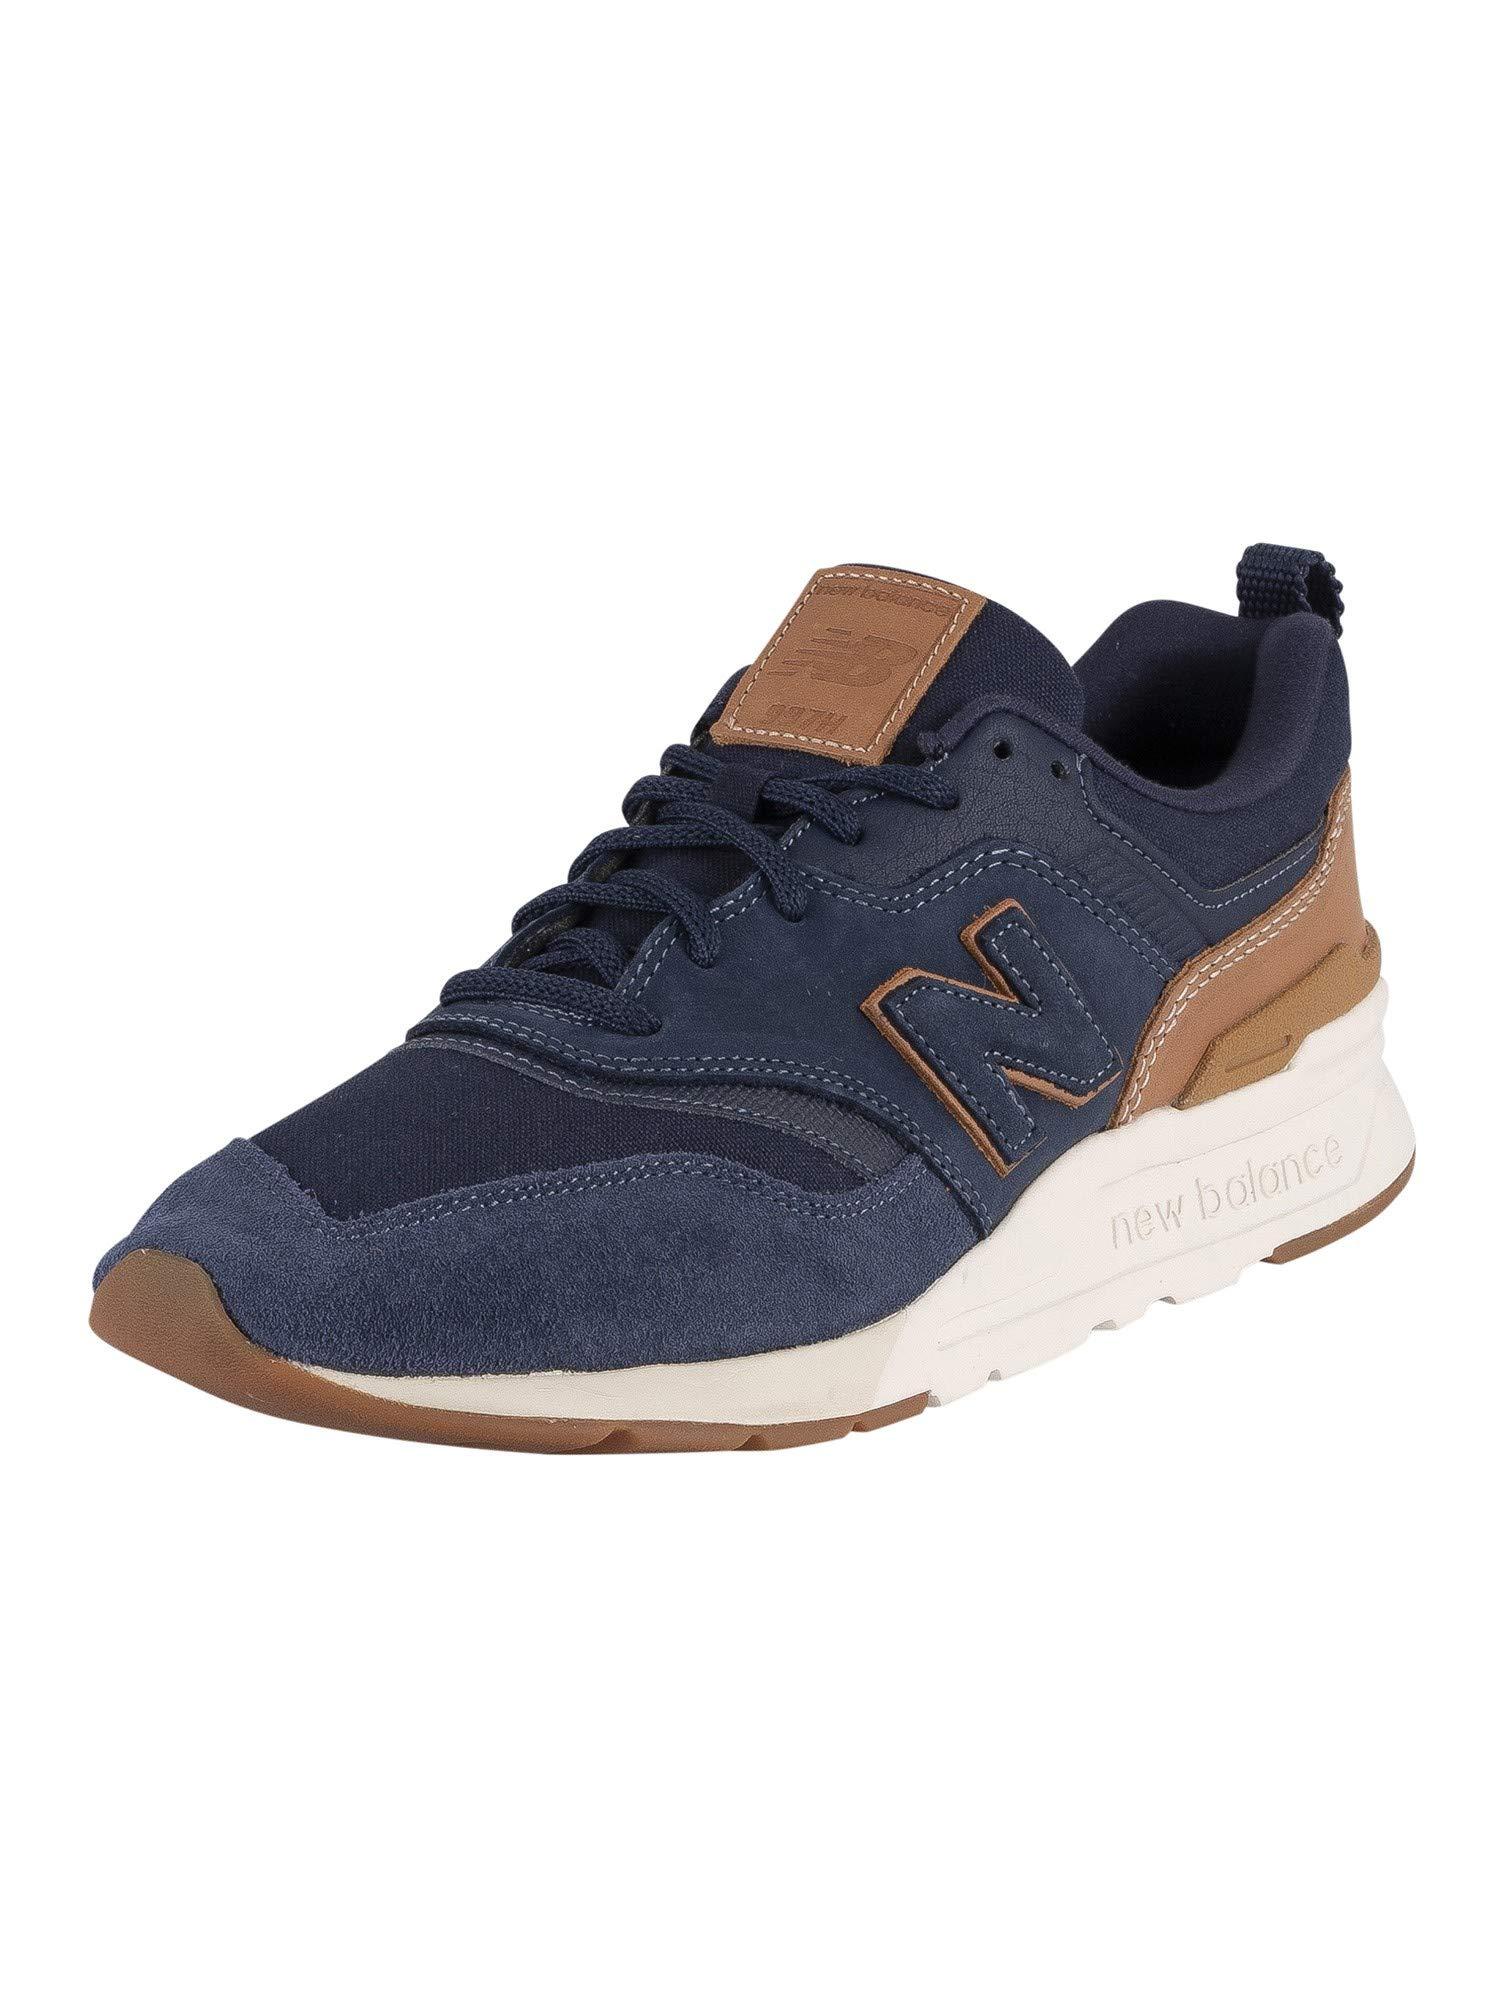 New Balance Suede Cm997had Trail Running Shoe in Navy (Blue) for ...